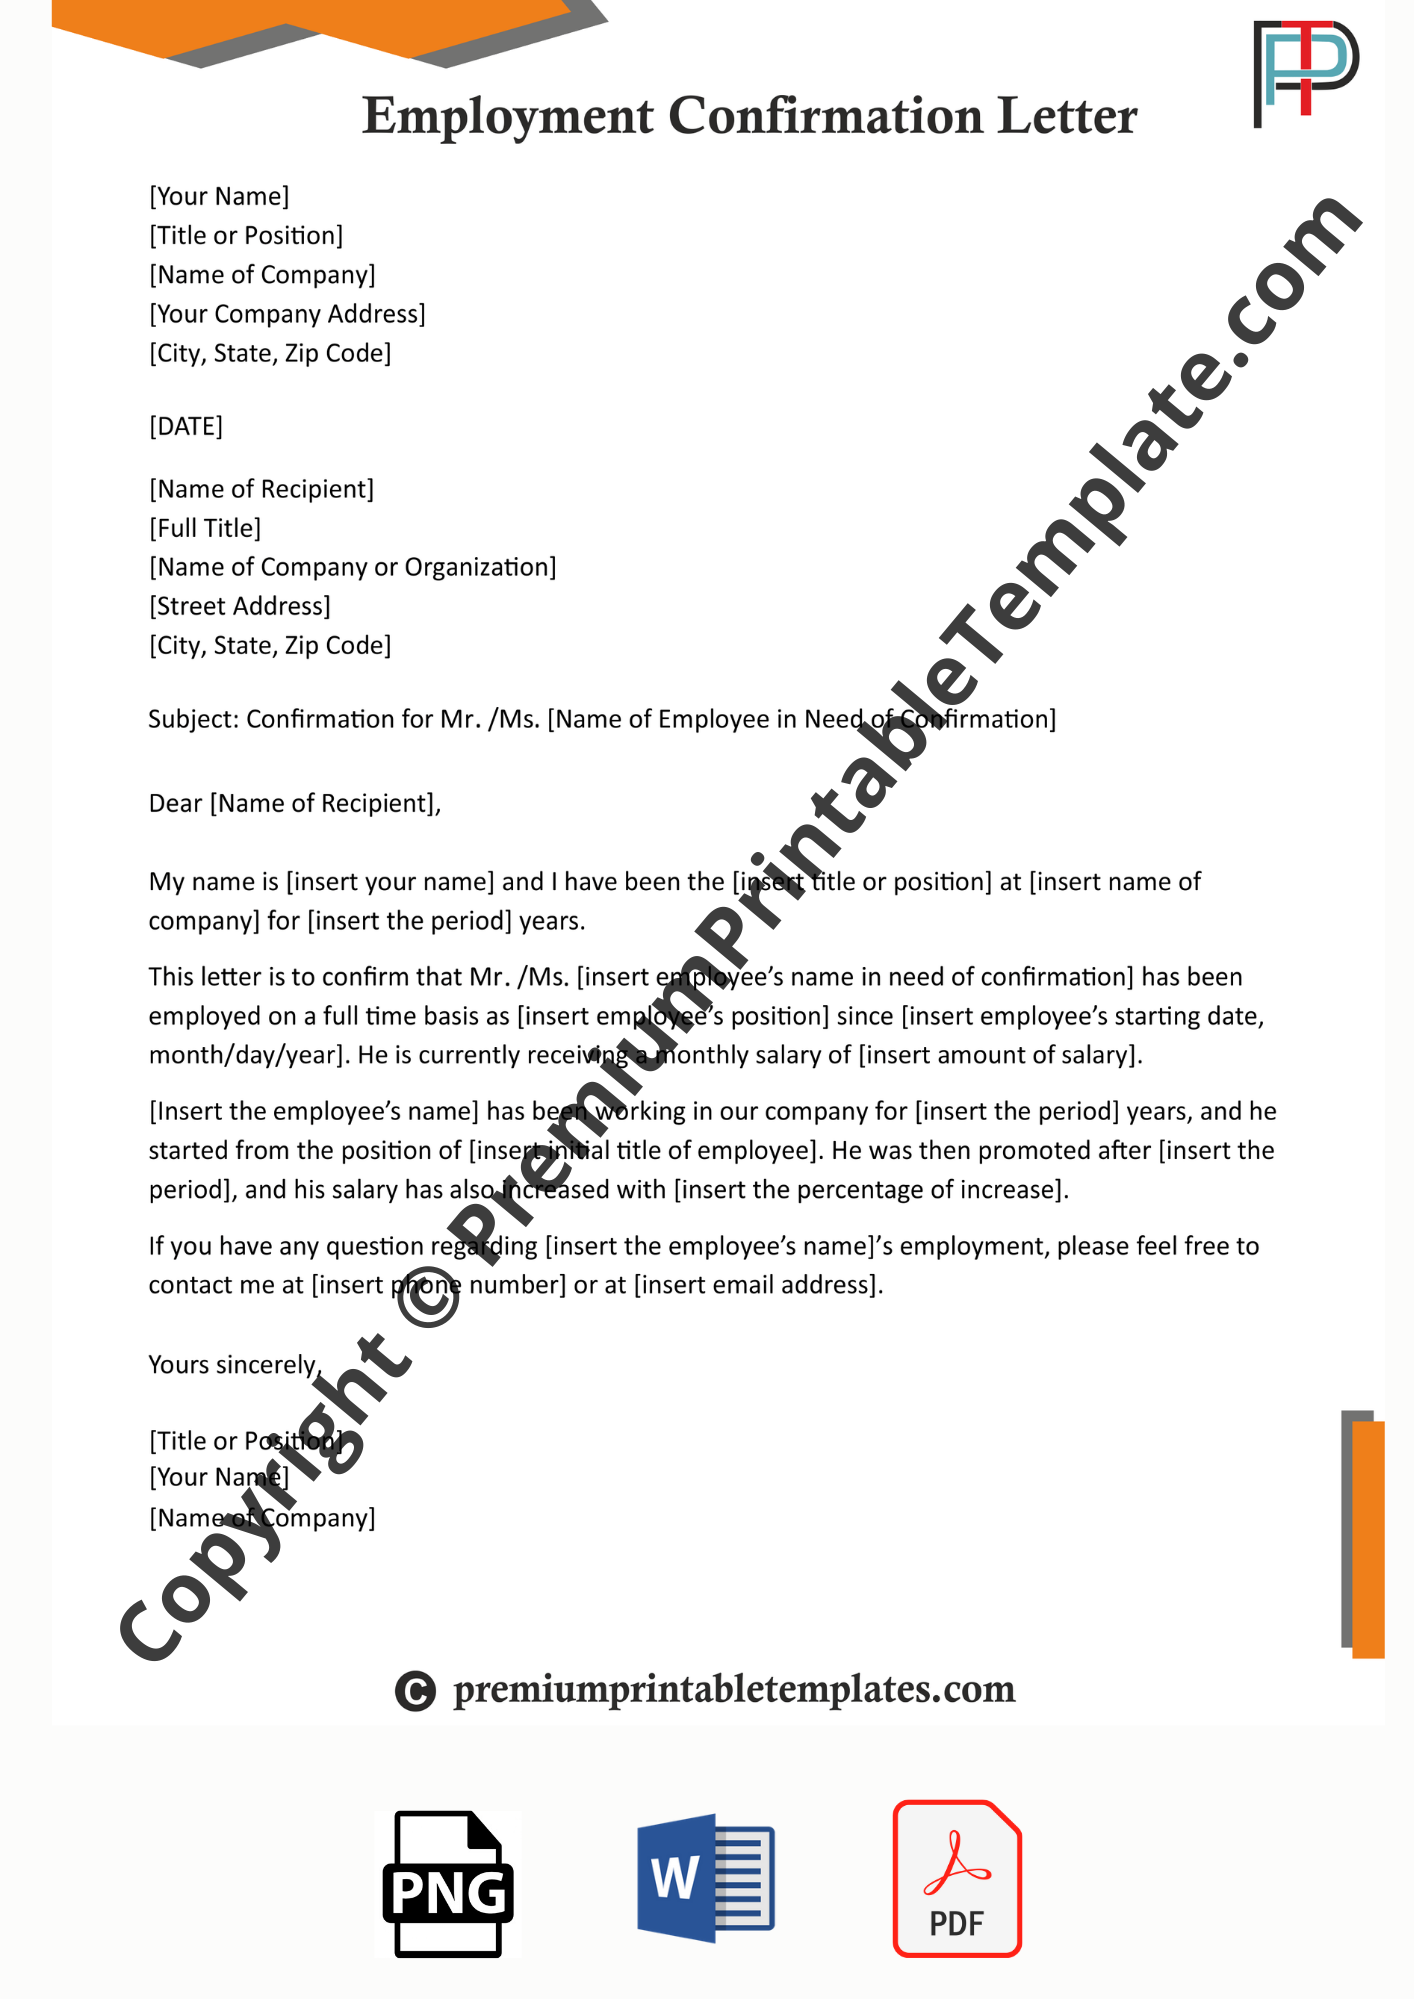 Employment Confirmation Letter Template from premiumprintabletemplates.com